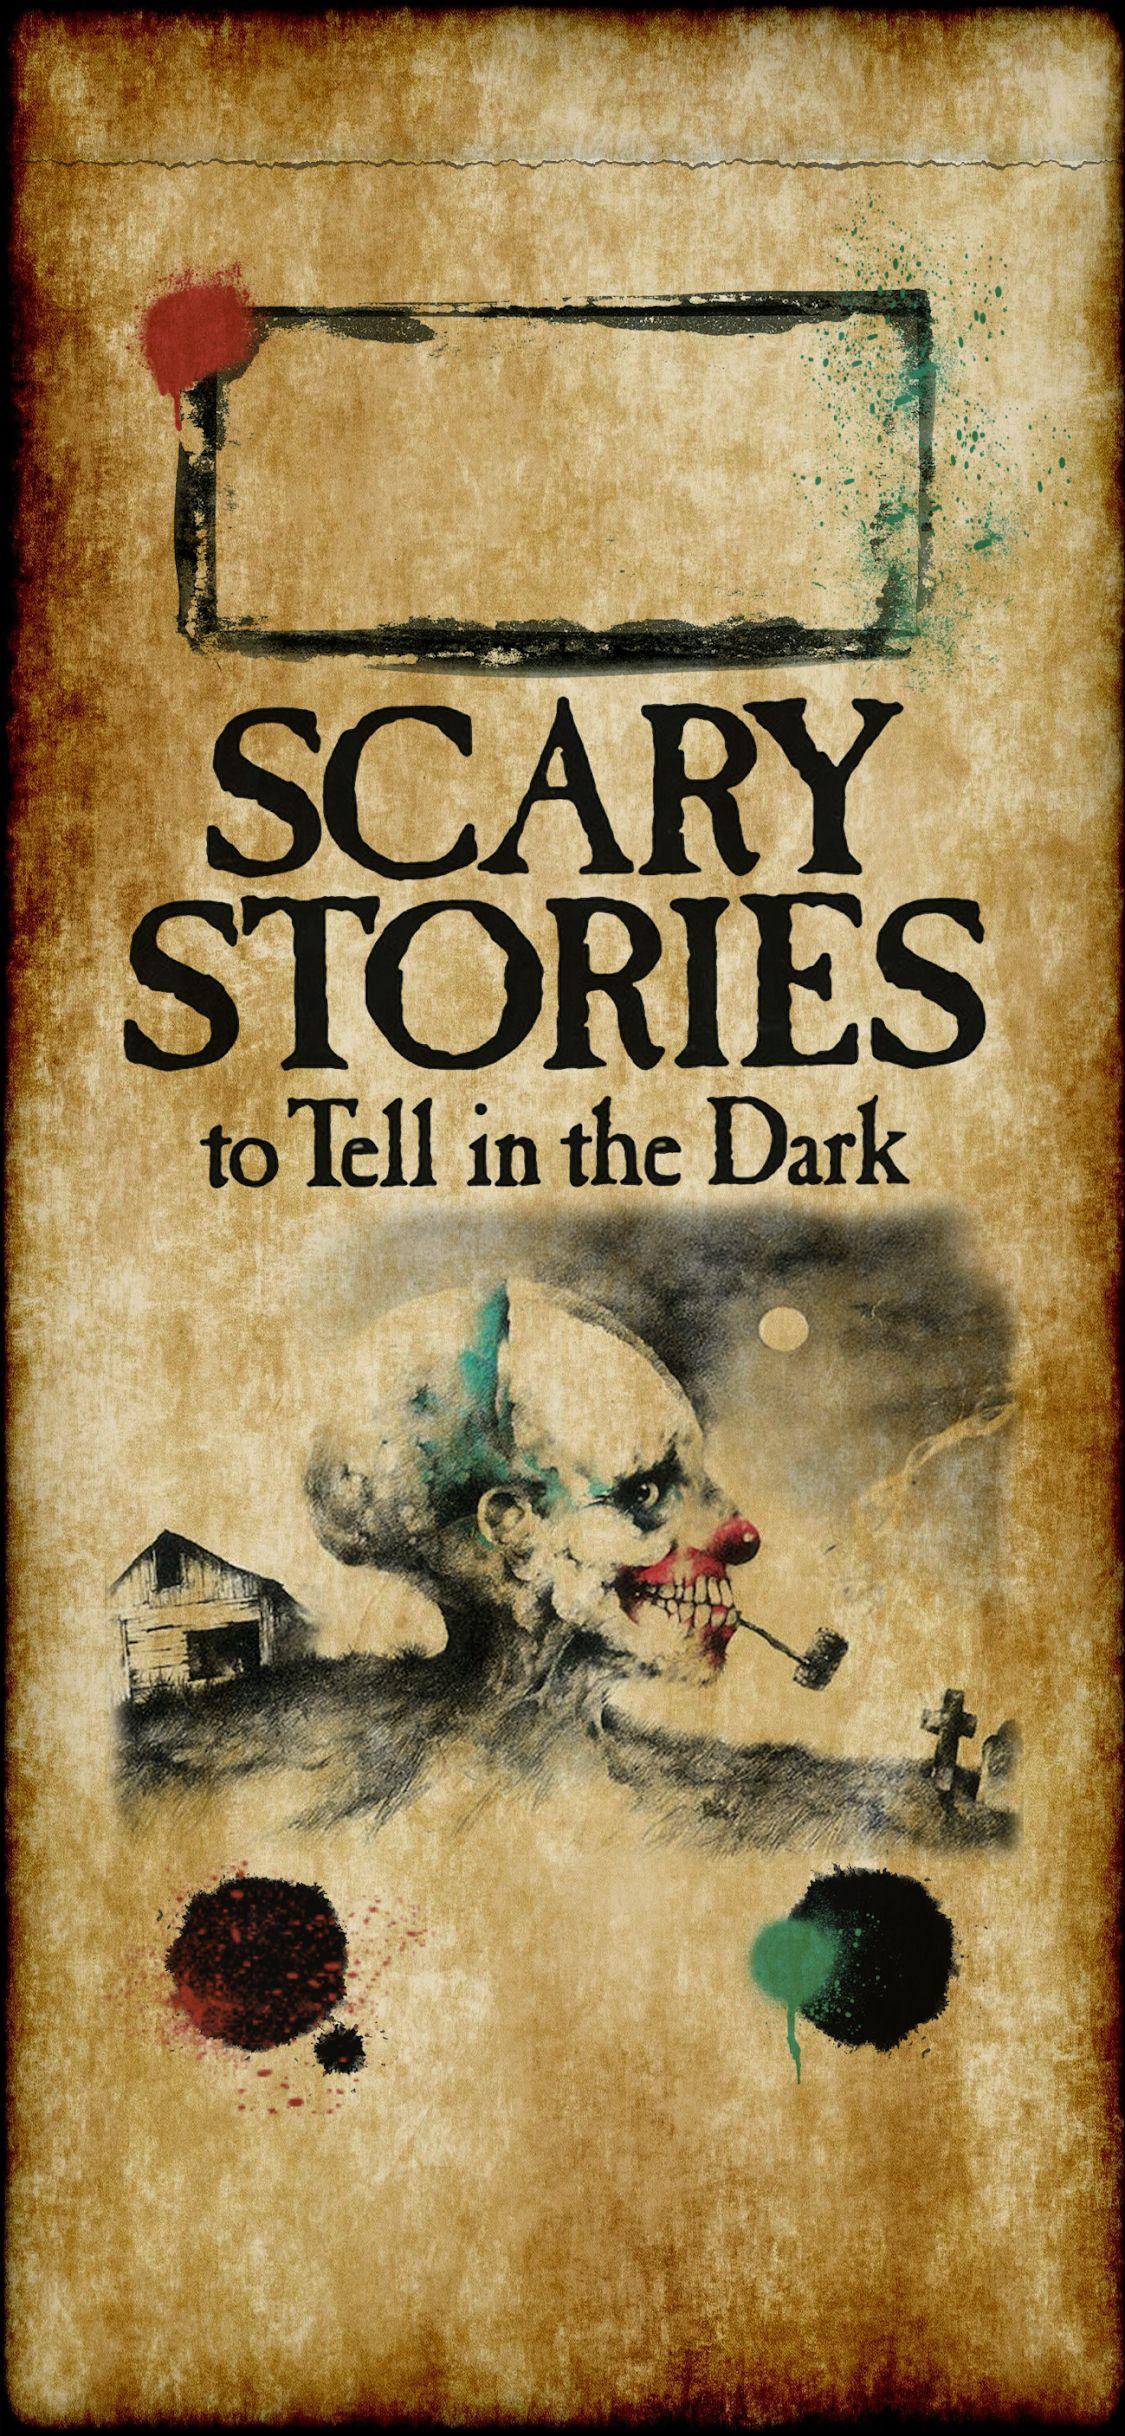 iPhoneX Lock Screen Scary Stories To Tell In The Dark. iPhone